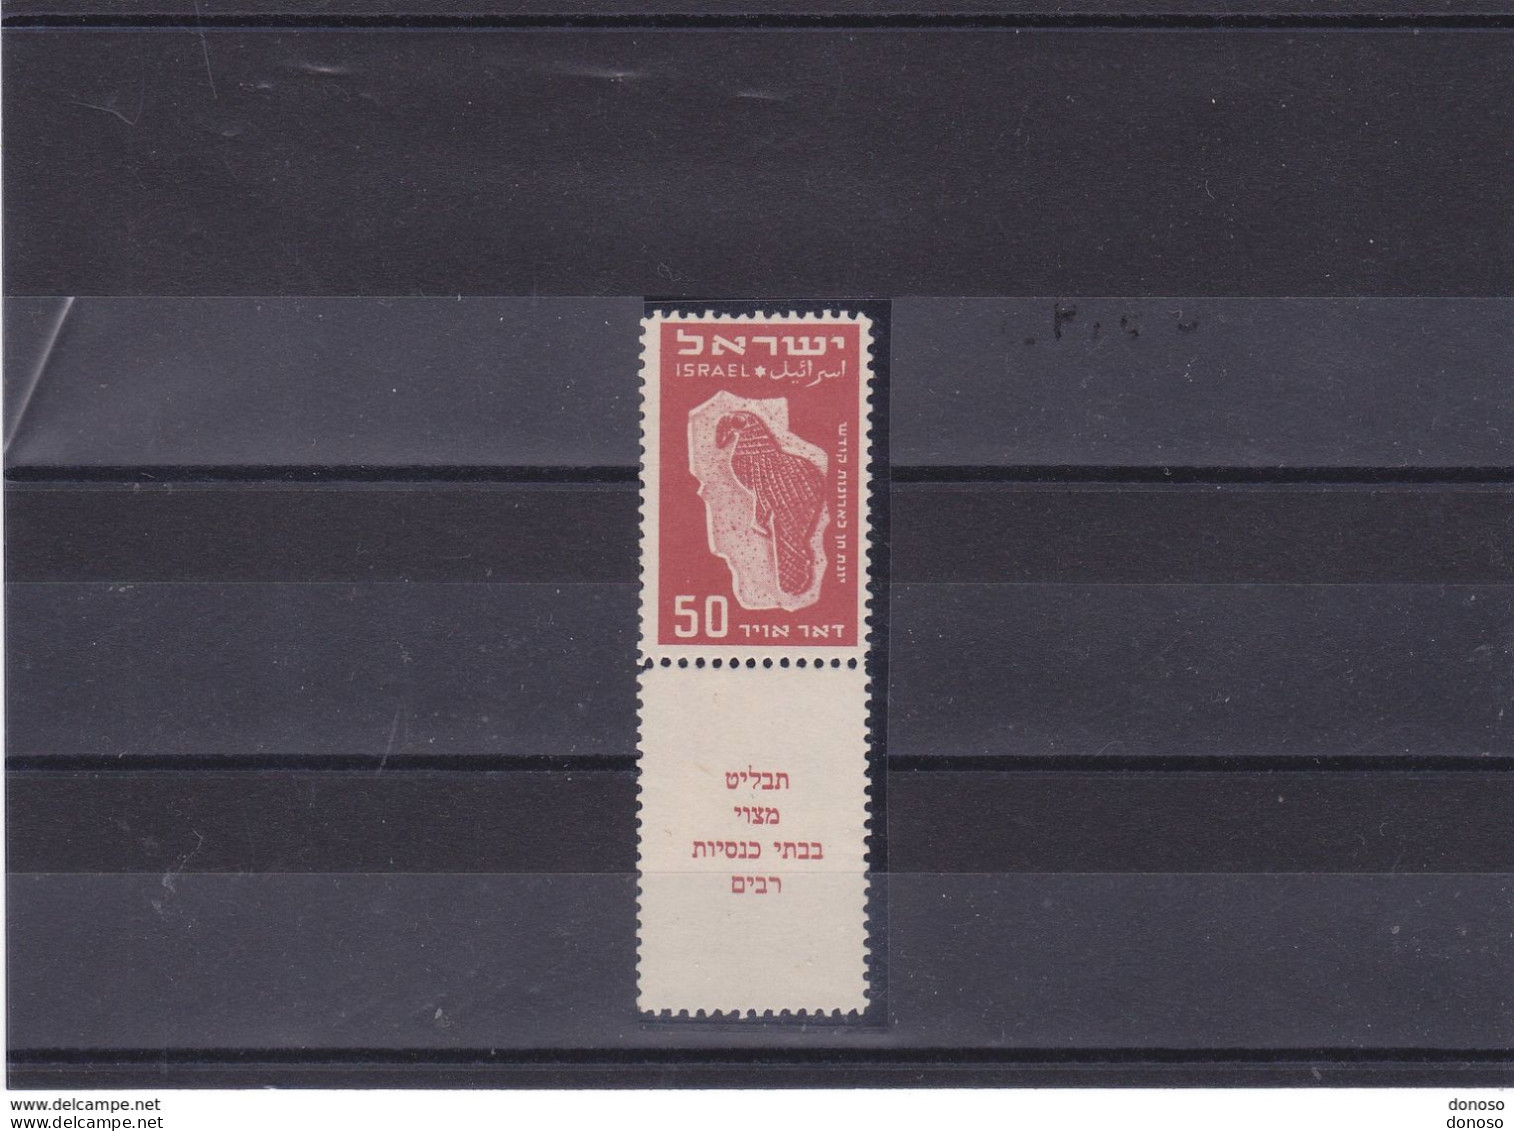 ISRAËL 1950 OISEAUX Yvert PA 4 Avec Tab NEUF* MH Cote 5 Euros - Unused Stamps (with Tabs)